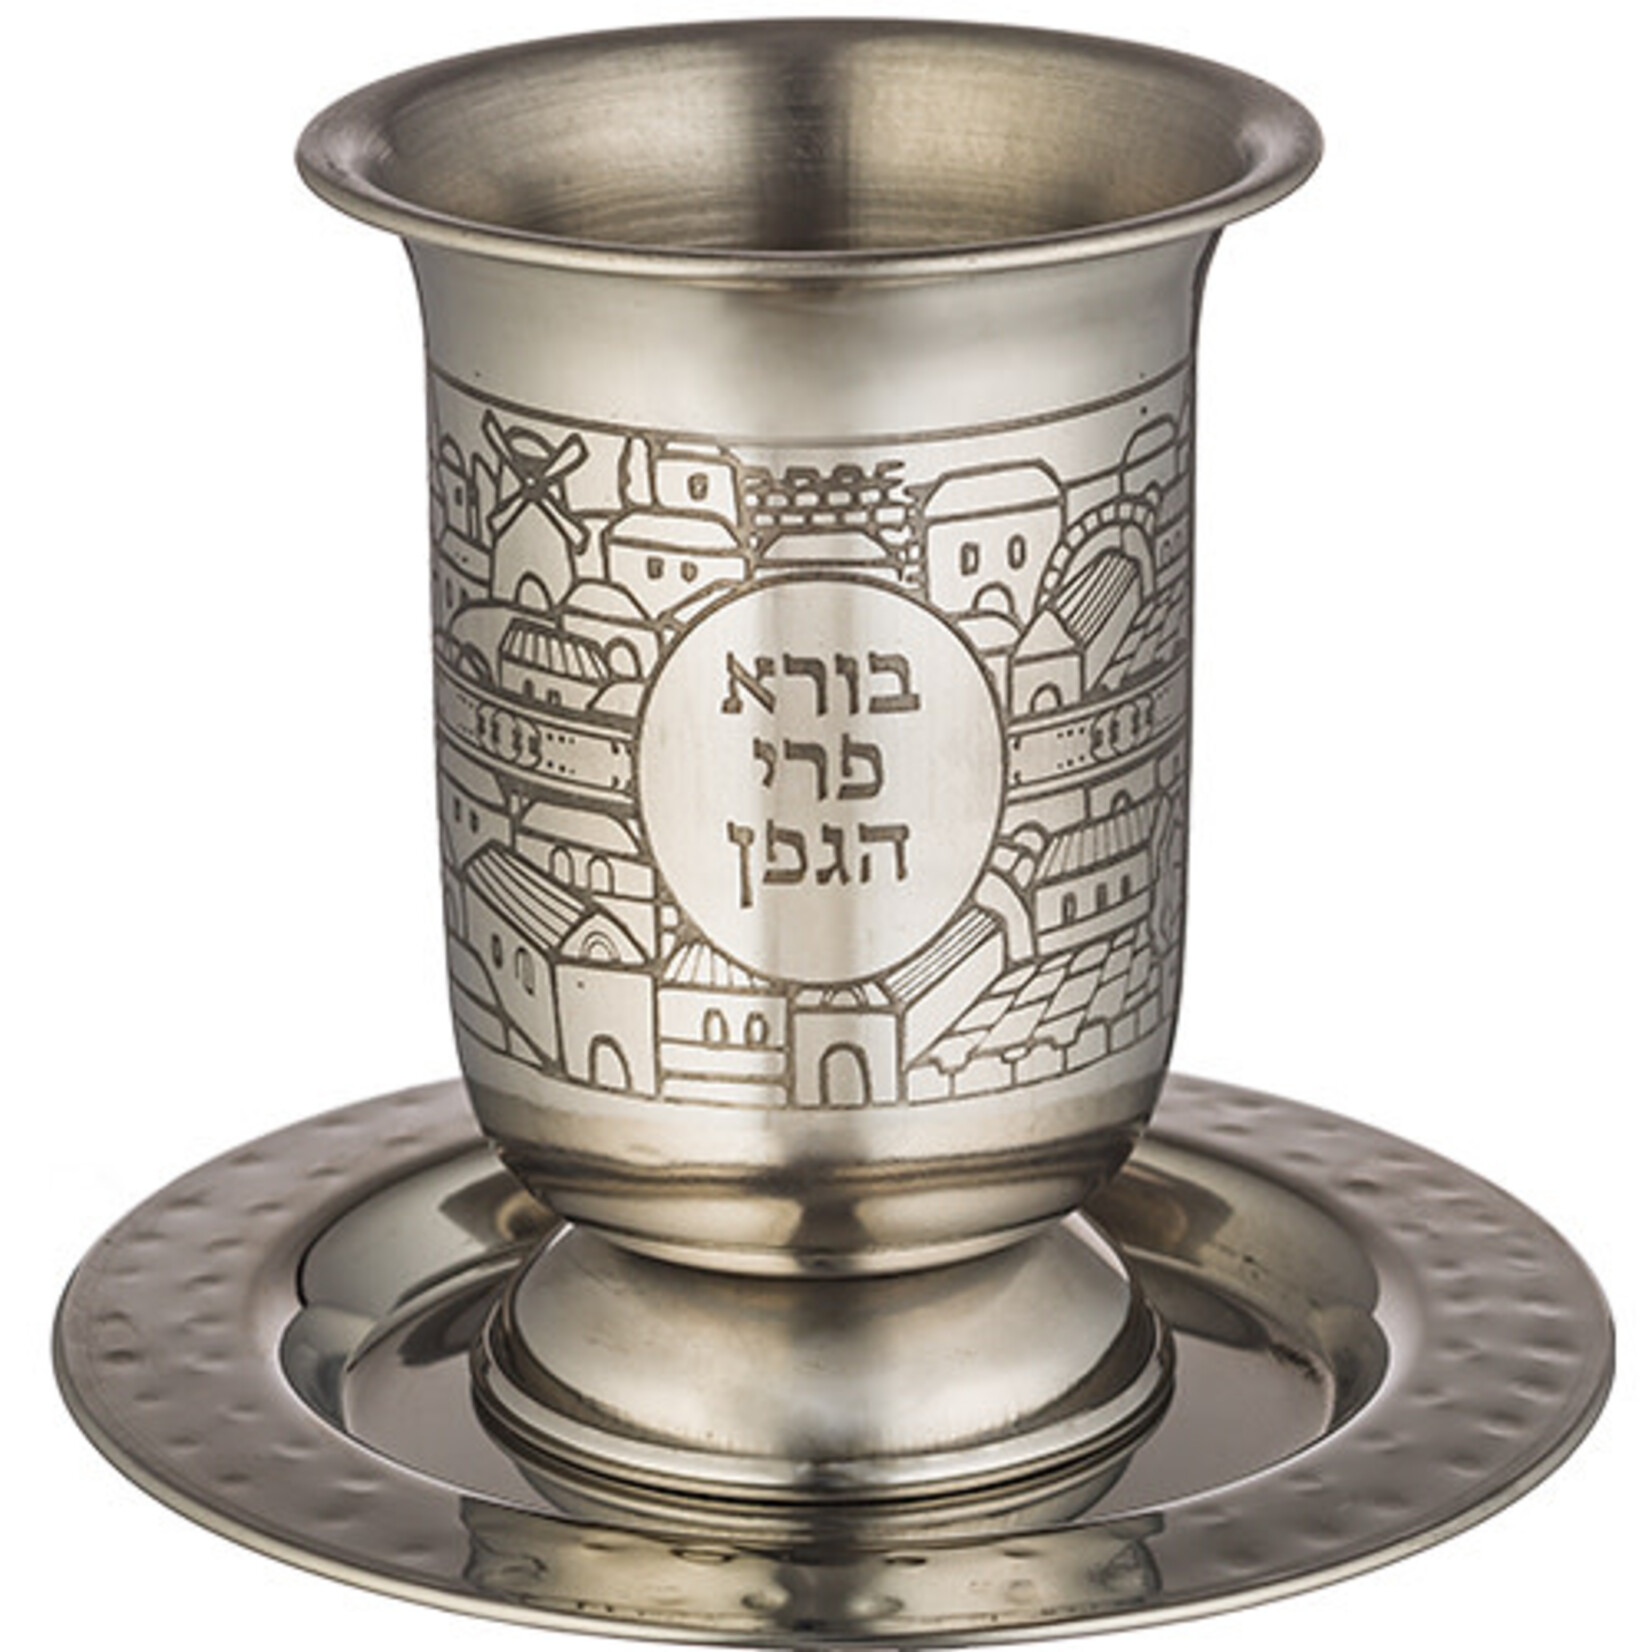 Stainless Steel Kiddush Cup with Tray, Engraved Jerusalem Design